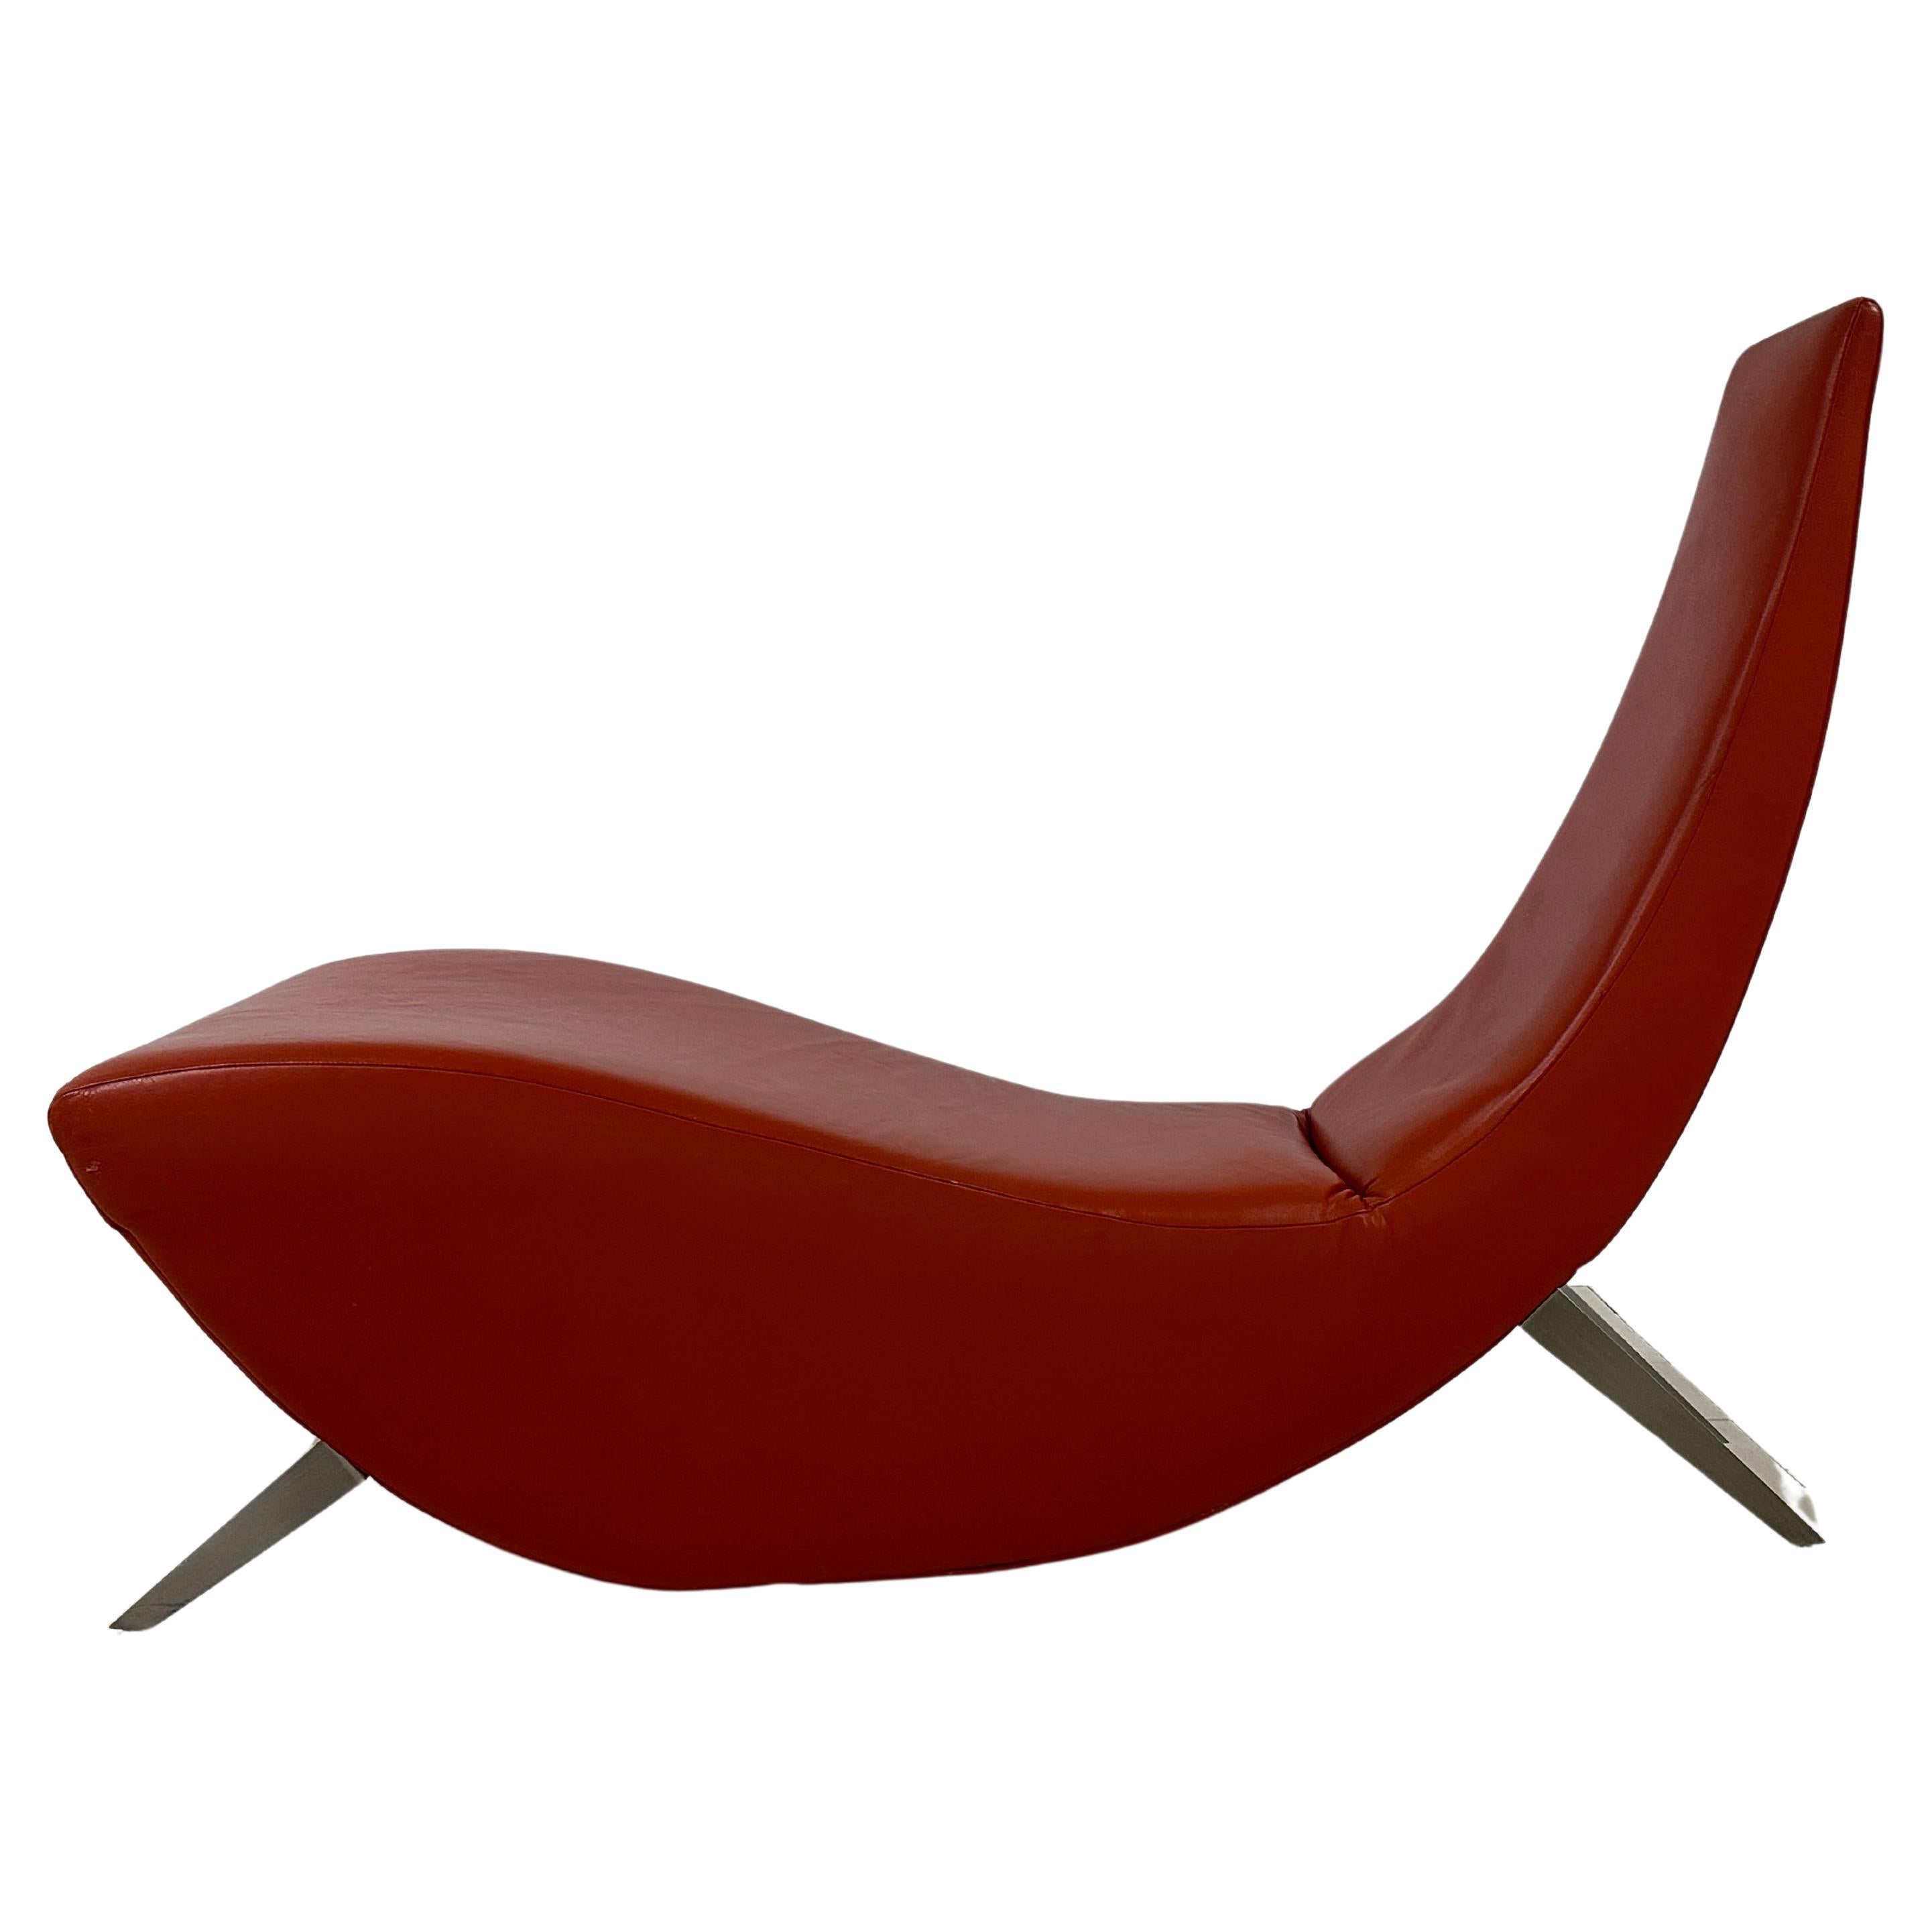 This chaise features a top-notch vermilion leather and 4 brushed steel legs.
It has been made by Stanley Jay Freidman  for Brueton. 
Its sculptural and sleek lines and the quality of the leather testify to the designer's attention to detail and